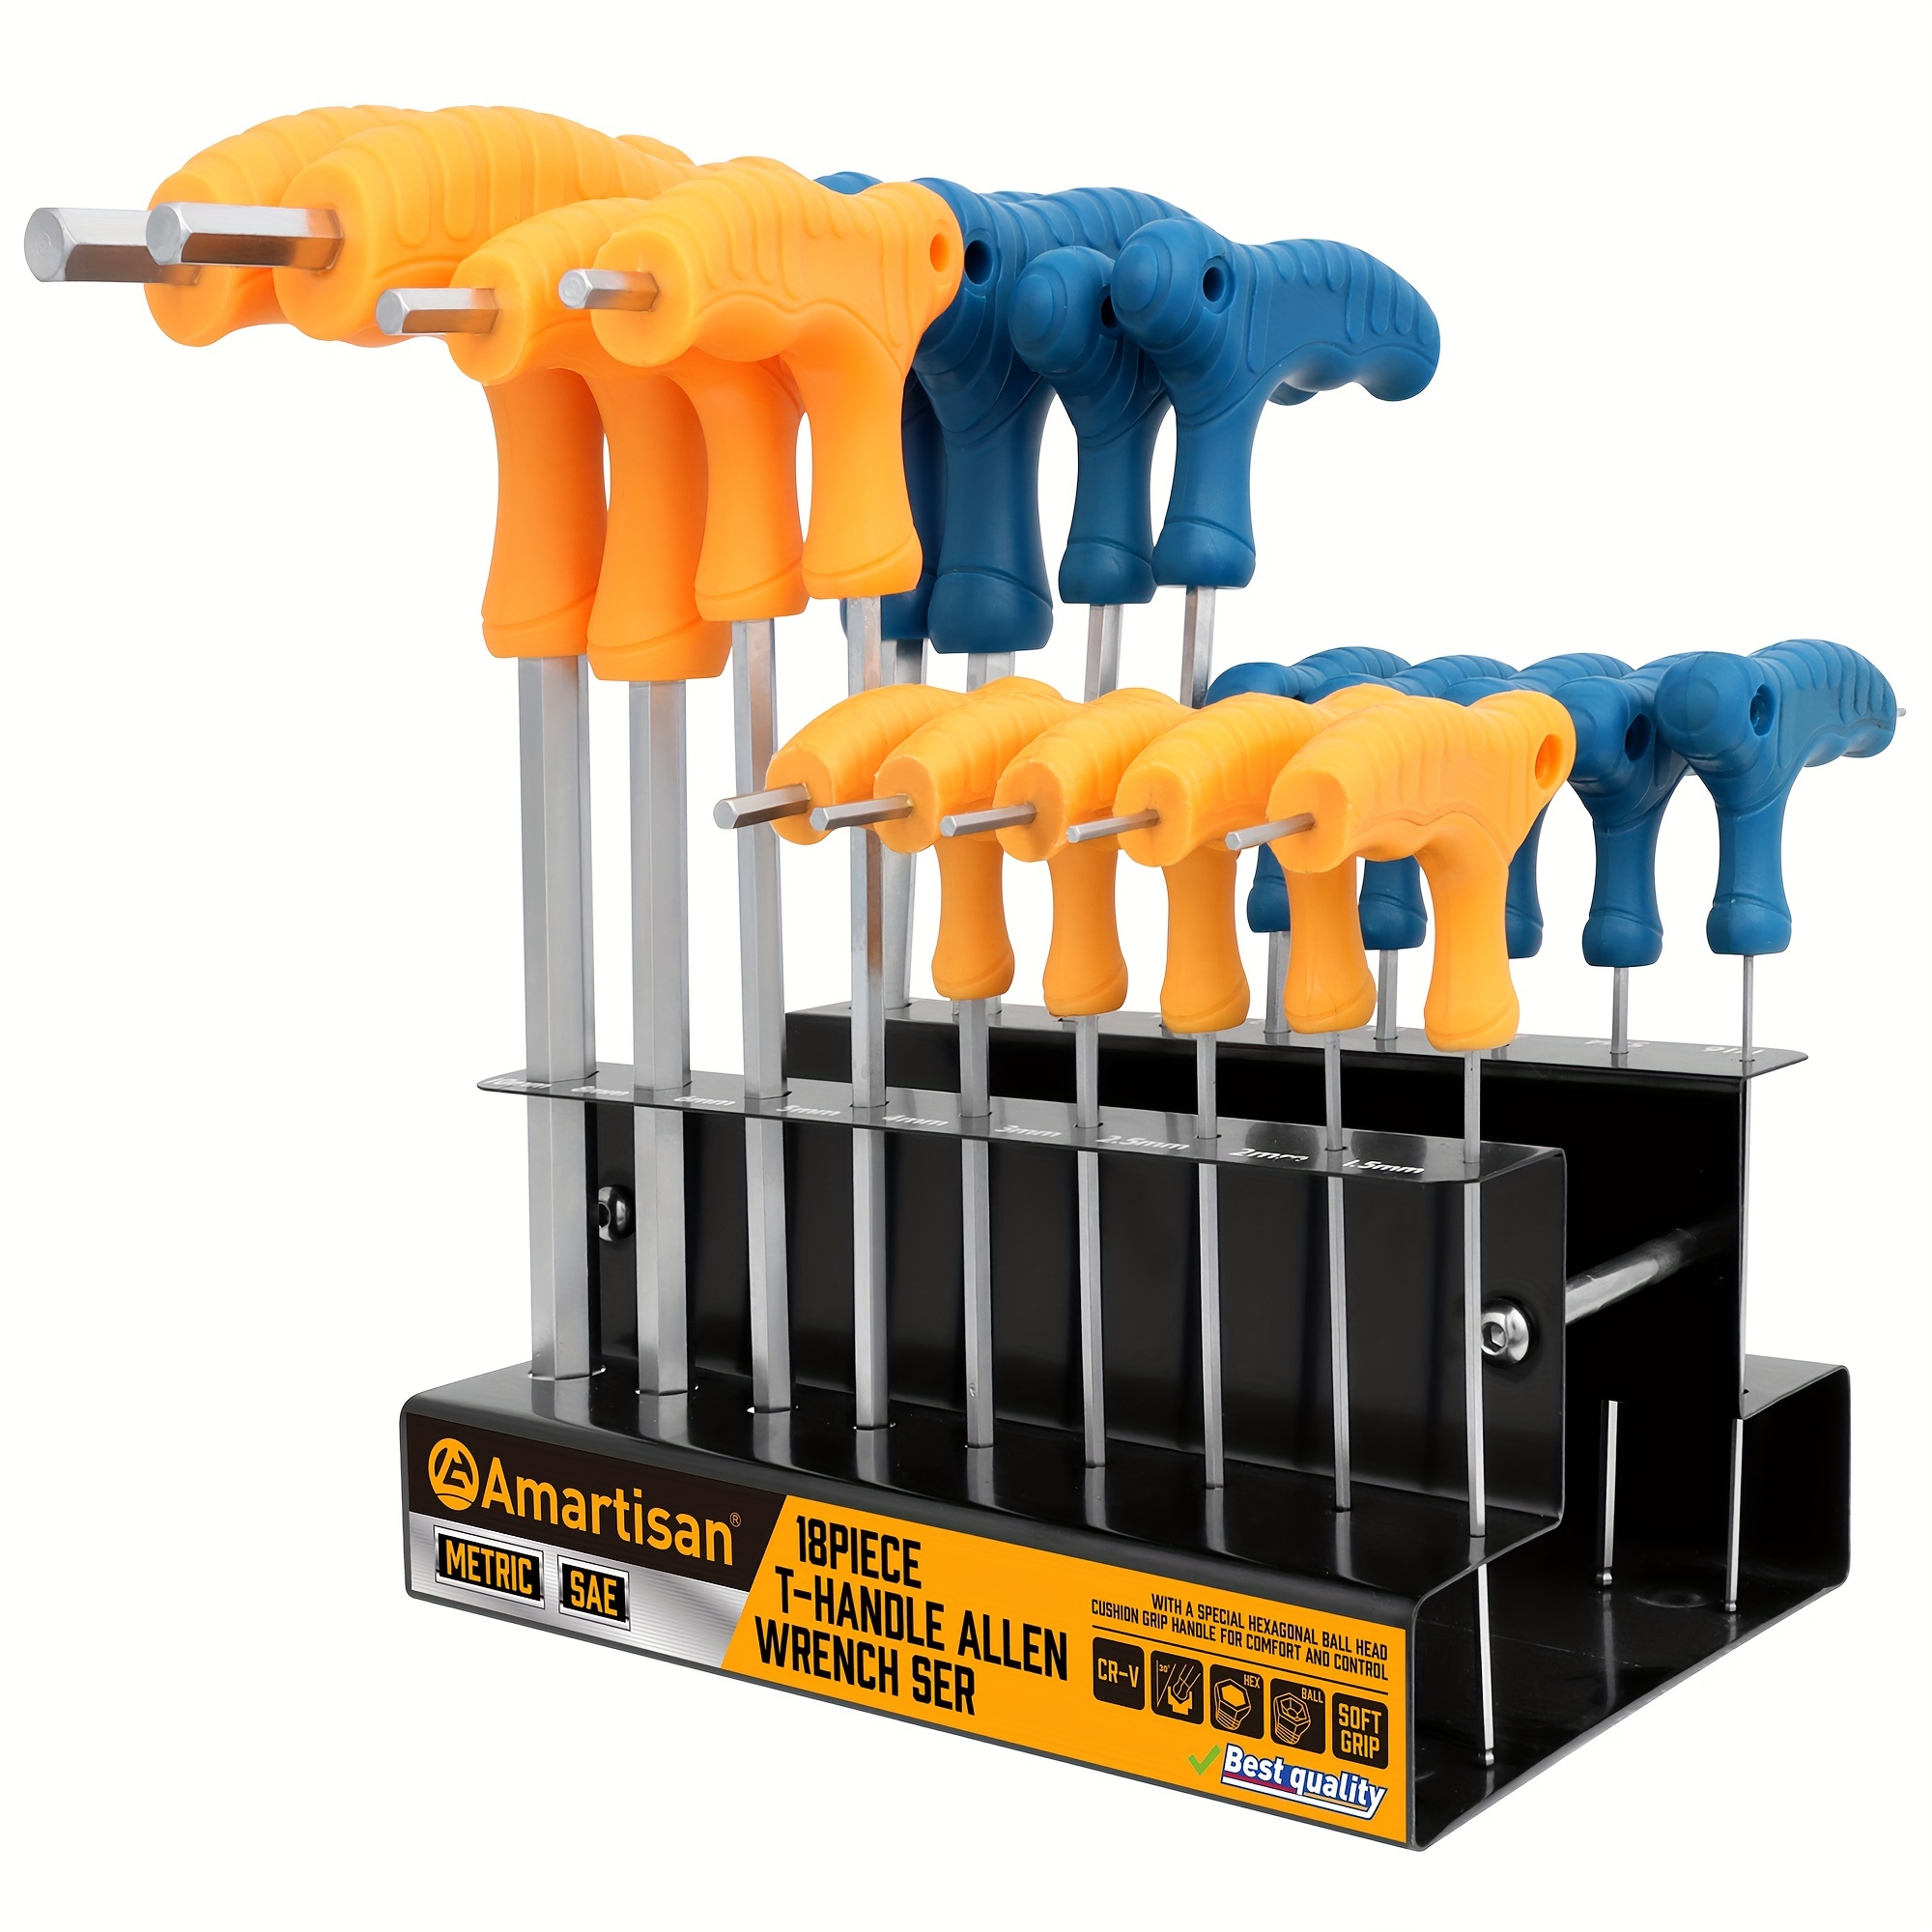 

18-piece T-handle Allen Wrench Set, Metric (1.5mm-10mm) And Sae (1/16"-3/8"), Long Arm Ball End Hex Key Wrench Set